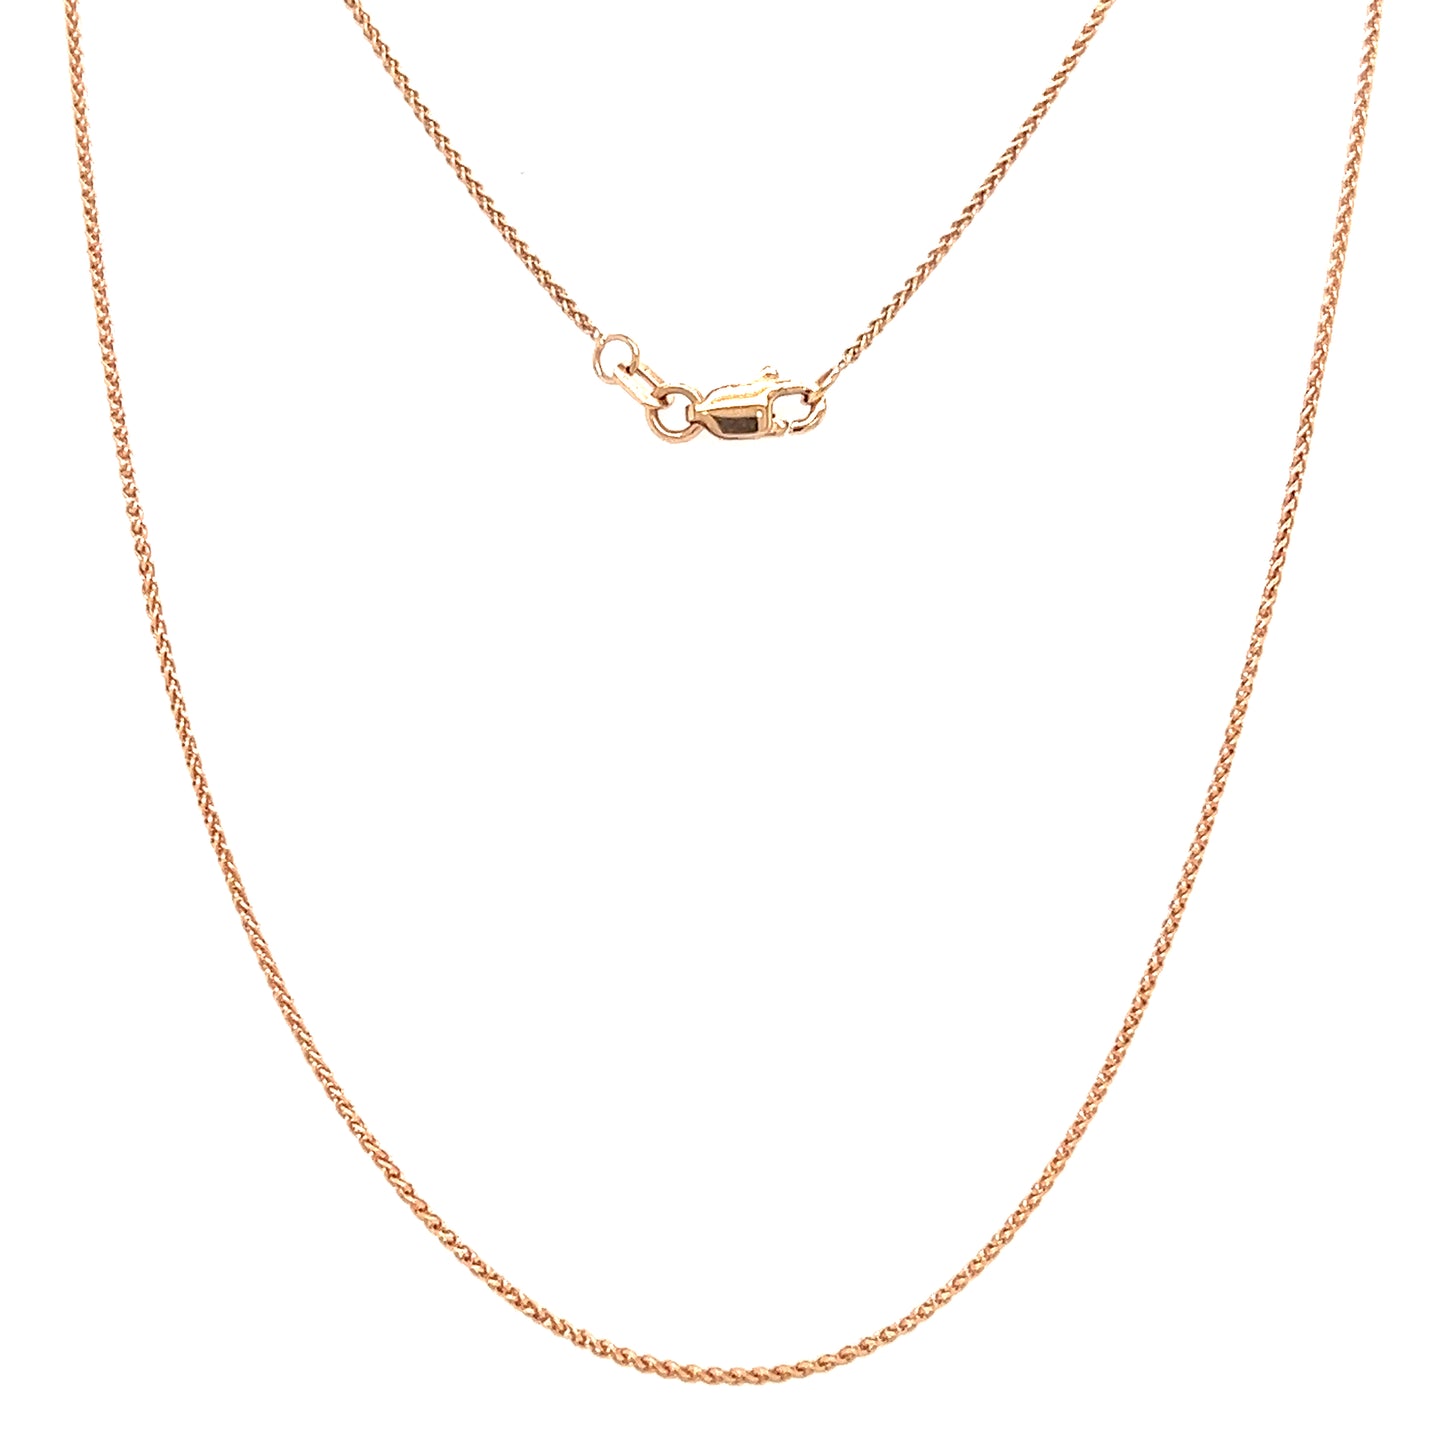 Wheat Chain 1.05mm with 18 Inches of Length in 14K Rose Gold Full Chain View